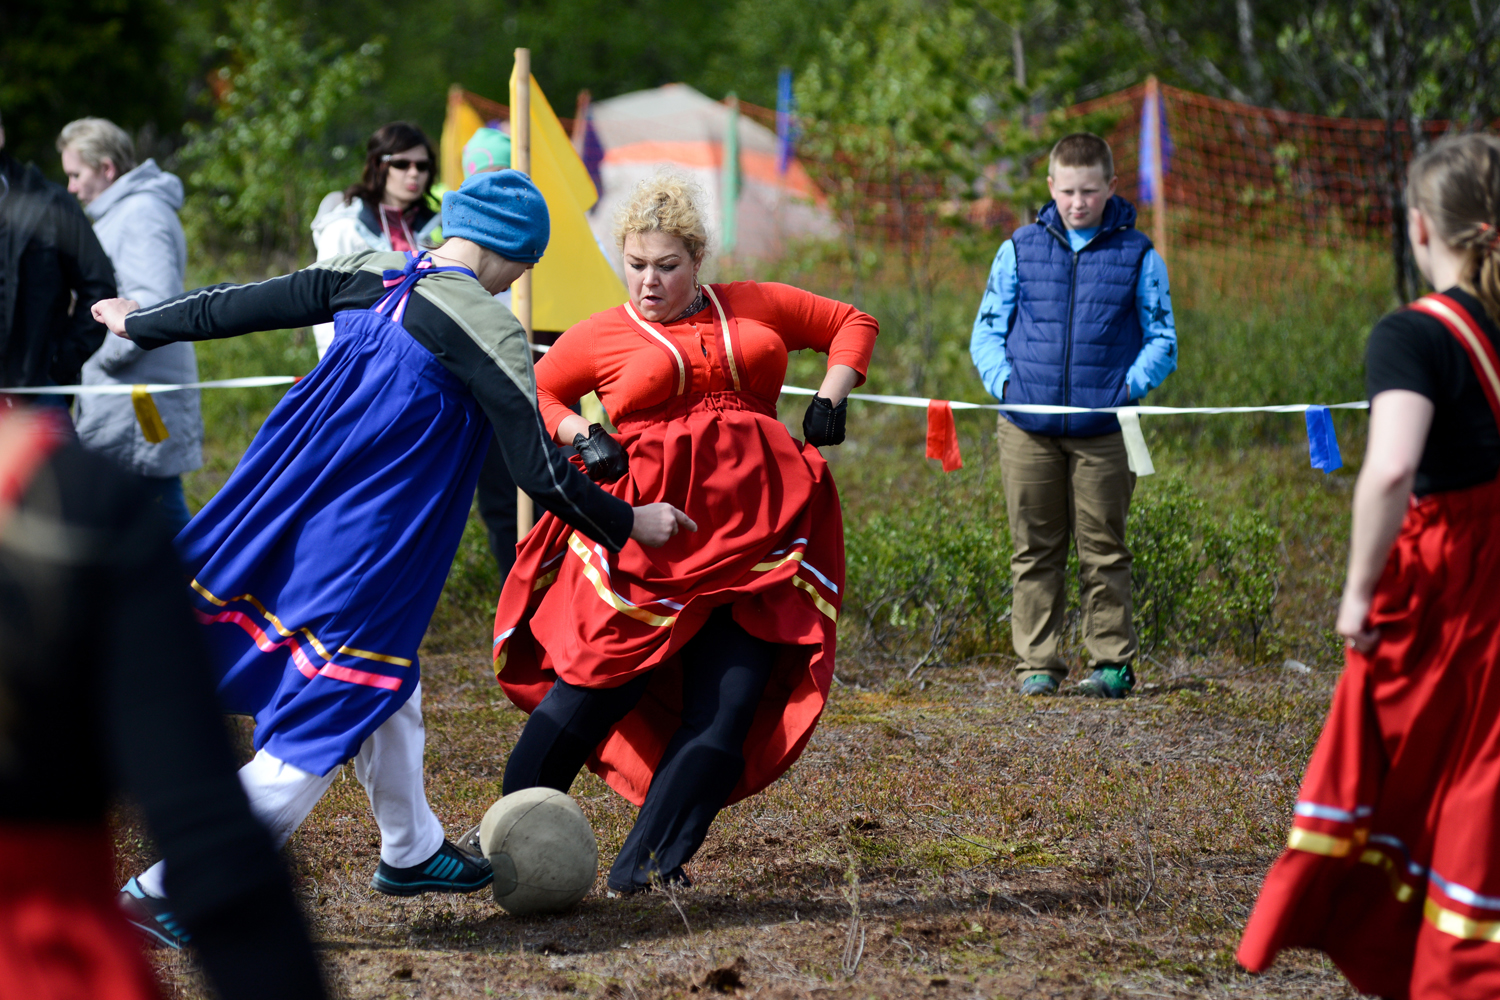 And whereas in normal soccer the goalkeeper can cover the ball with their body, in Saami football the goalkeeper protects the ball by covering it with the hem of the skirt.